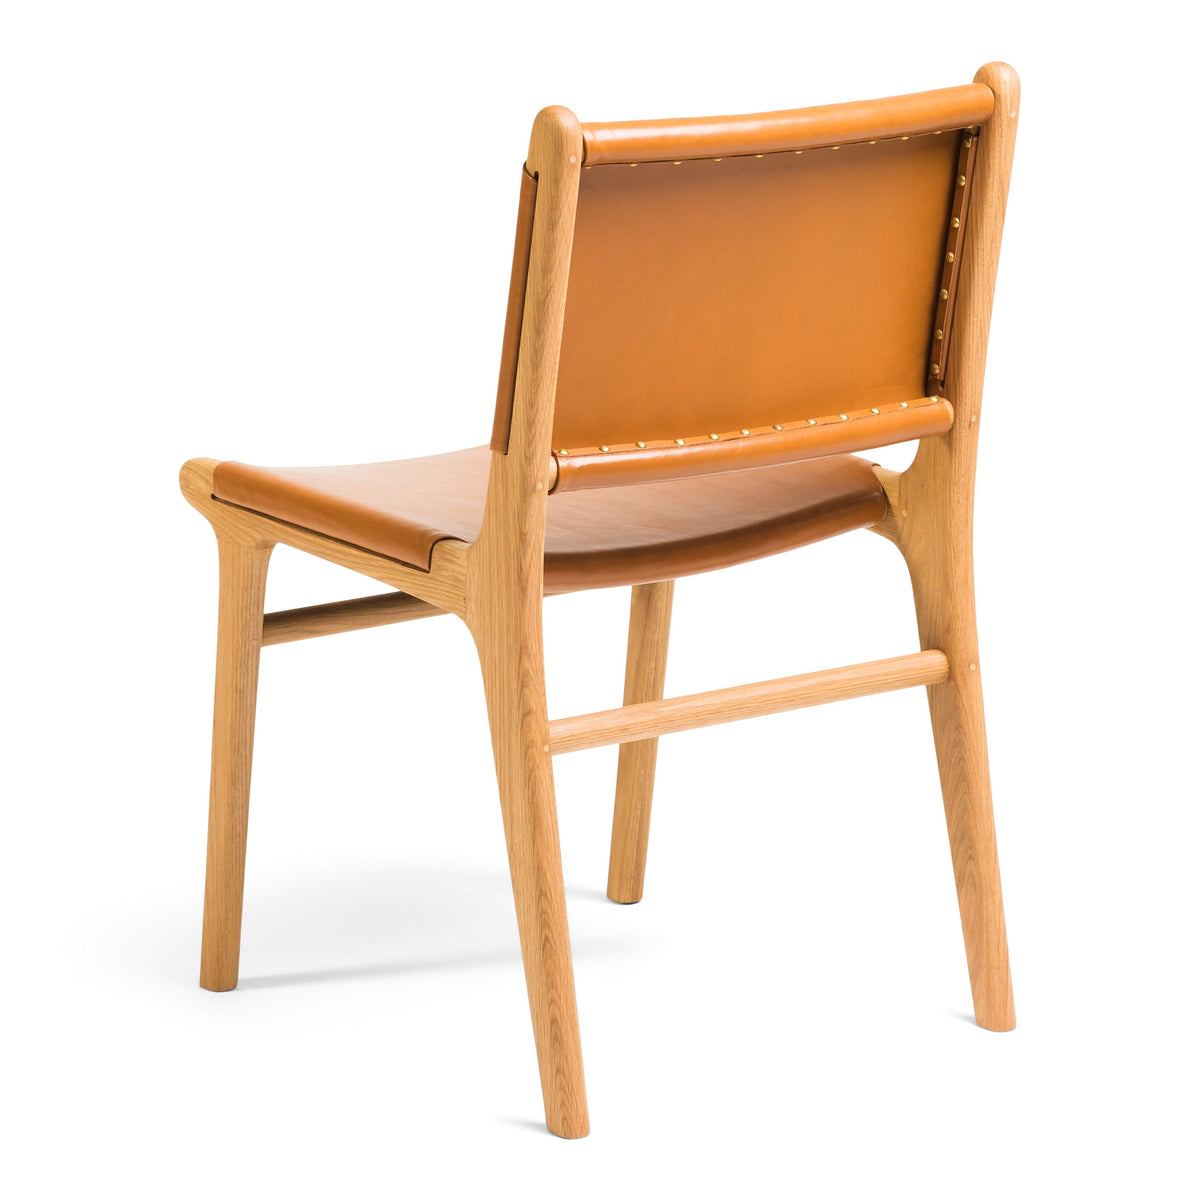 Clearance Spensley Dining Chair - Whiskey